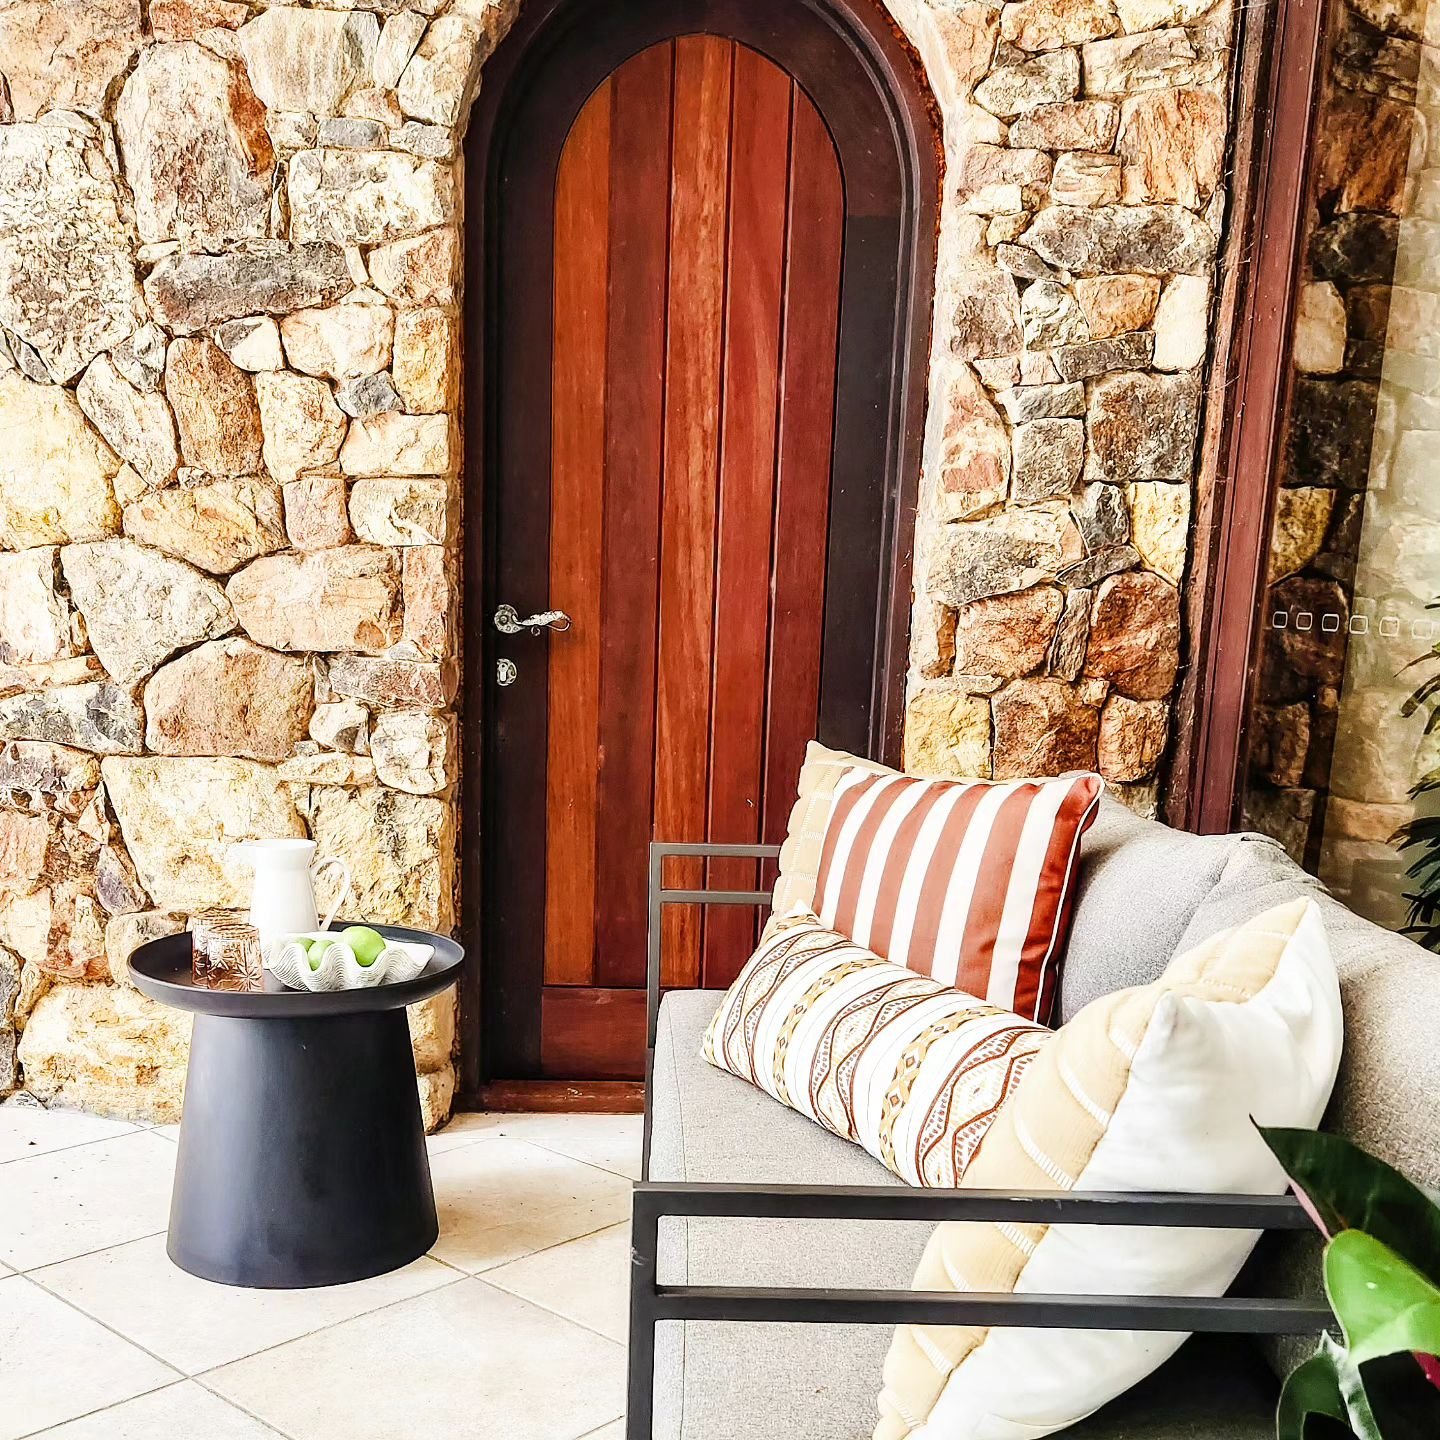 We are obsessed with this rock wall and arched door. 
It's was a fun property to style 🌴
#staginghomesforsale 
#stagingcairns 
#stagingcairnshomes 
#cairnshomestaging 
#cairnsrealestate 
#realestatecairns 
#propertystylingcairns 
#propertystyling 
#